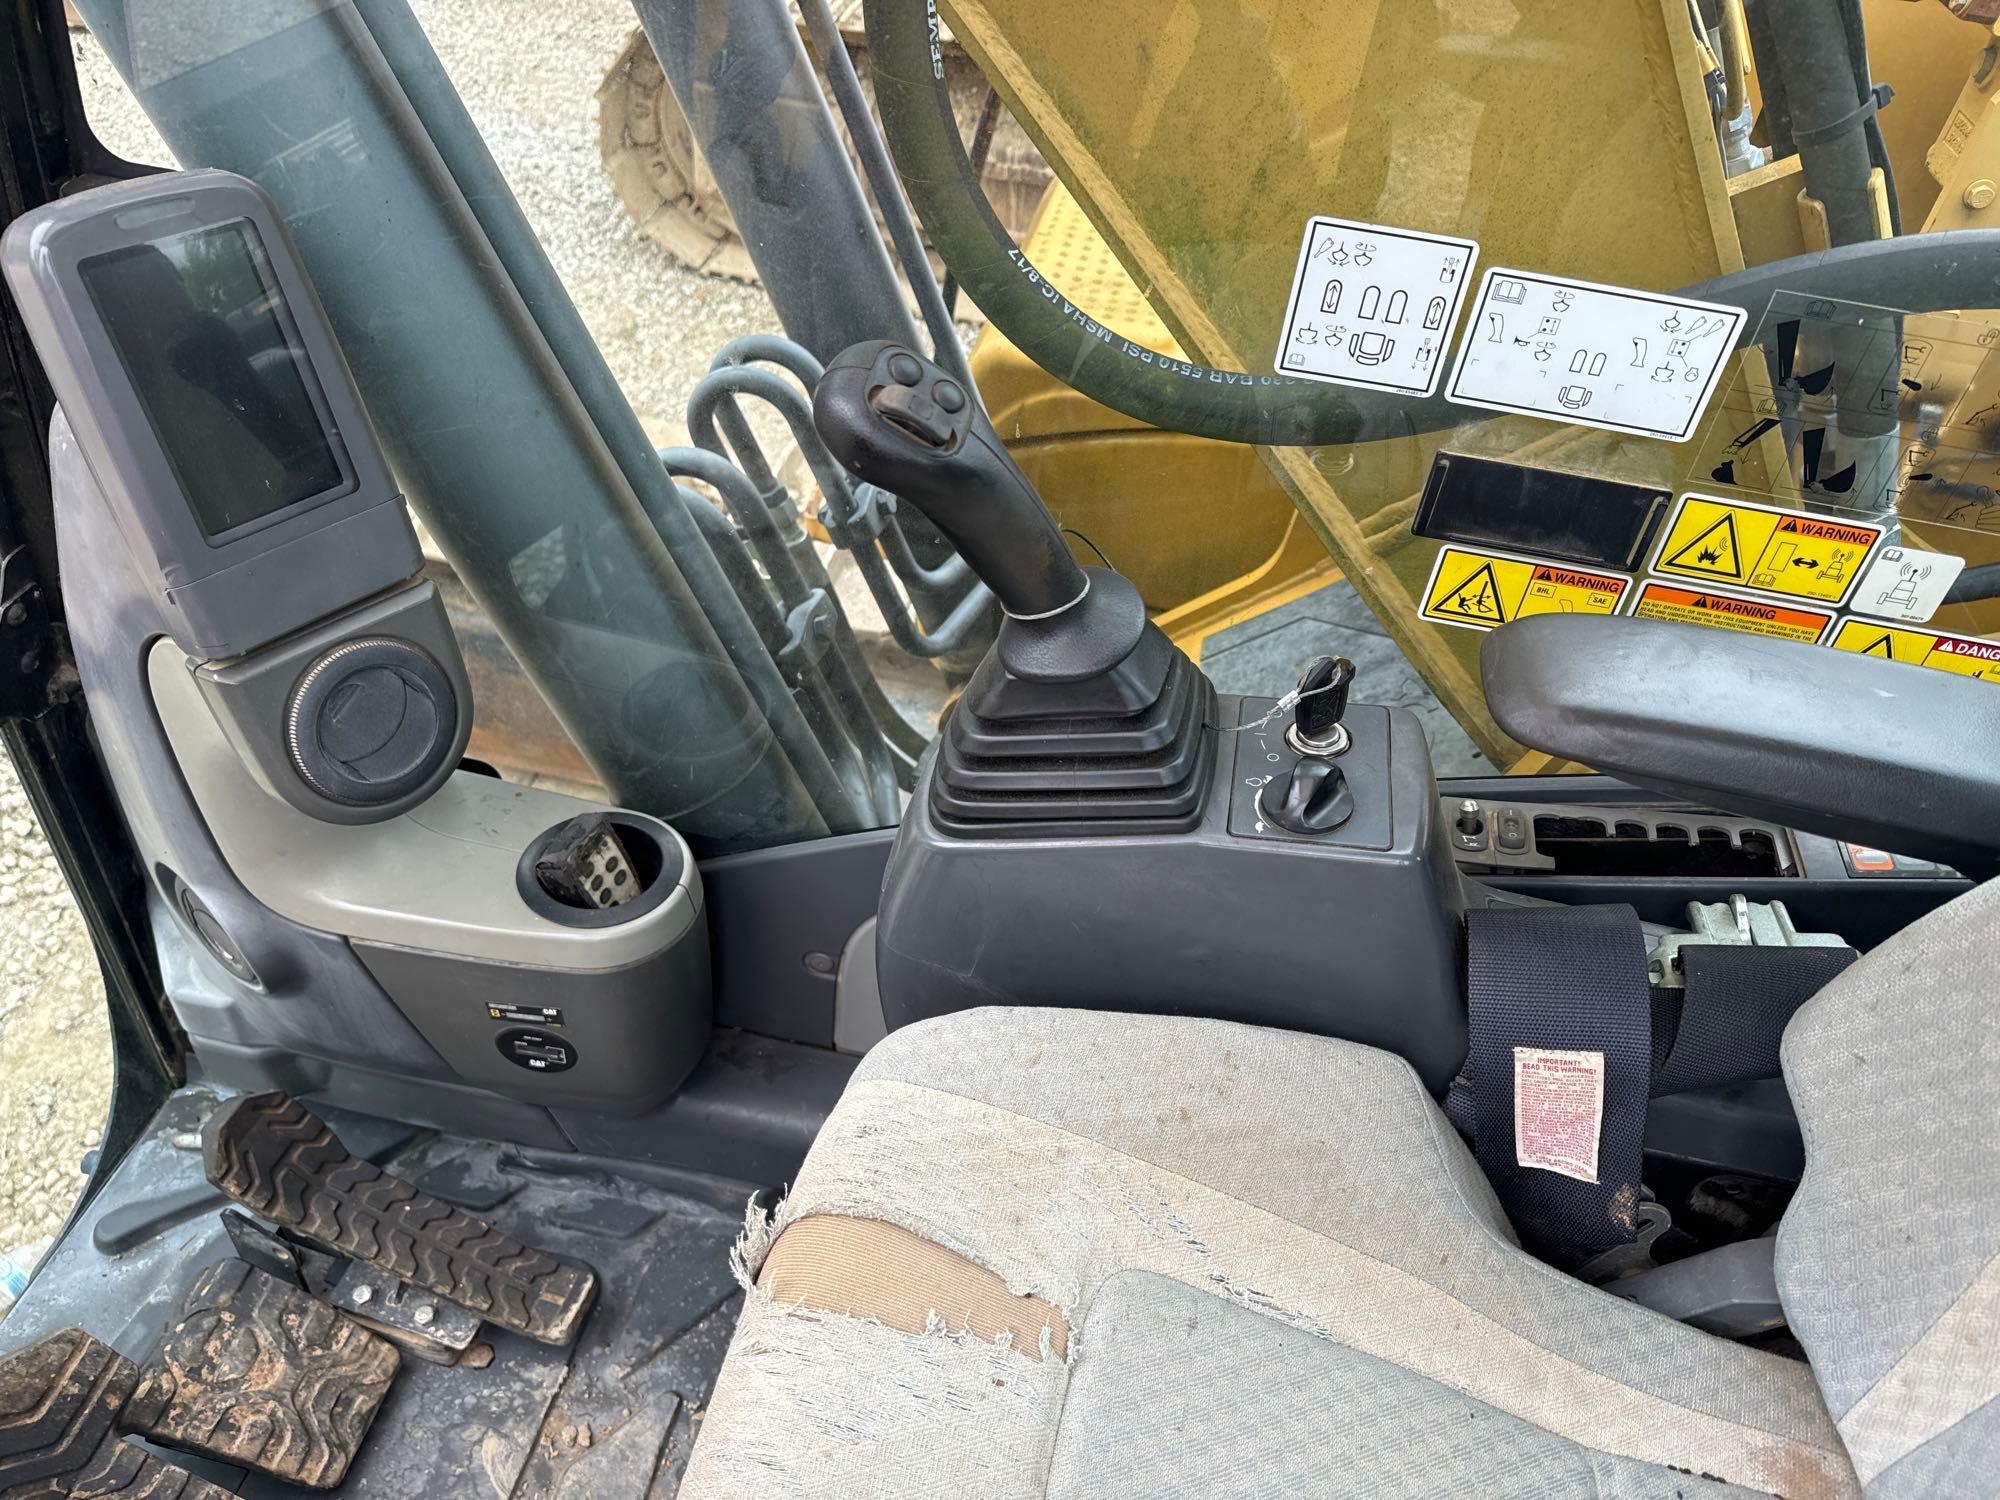 CAT 320DL HYDRAULIC EXCAVATOR...SN:SPN01150 powered by Cat diesel engine, equipped with Cab, air,